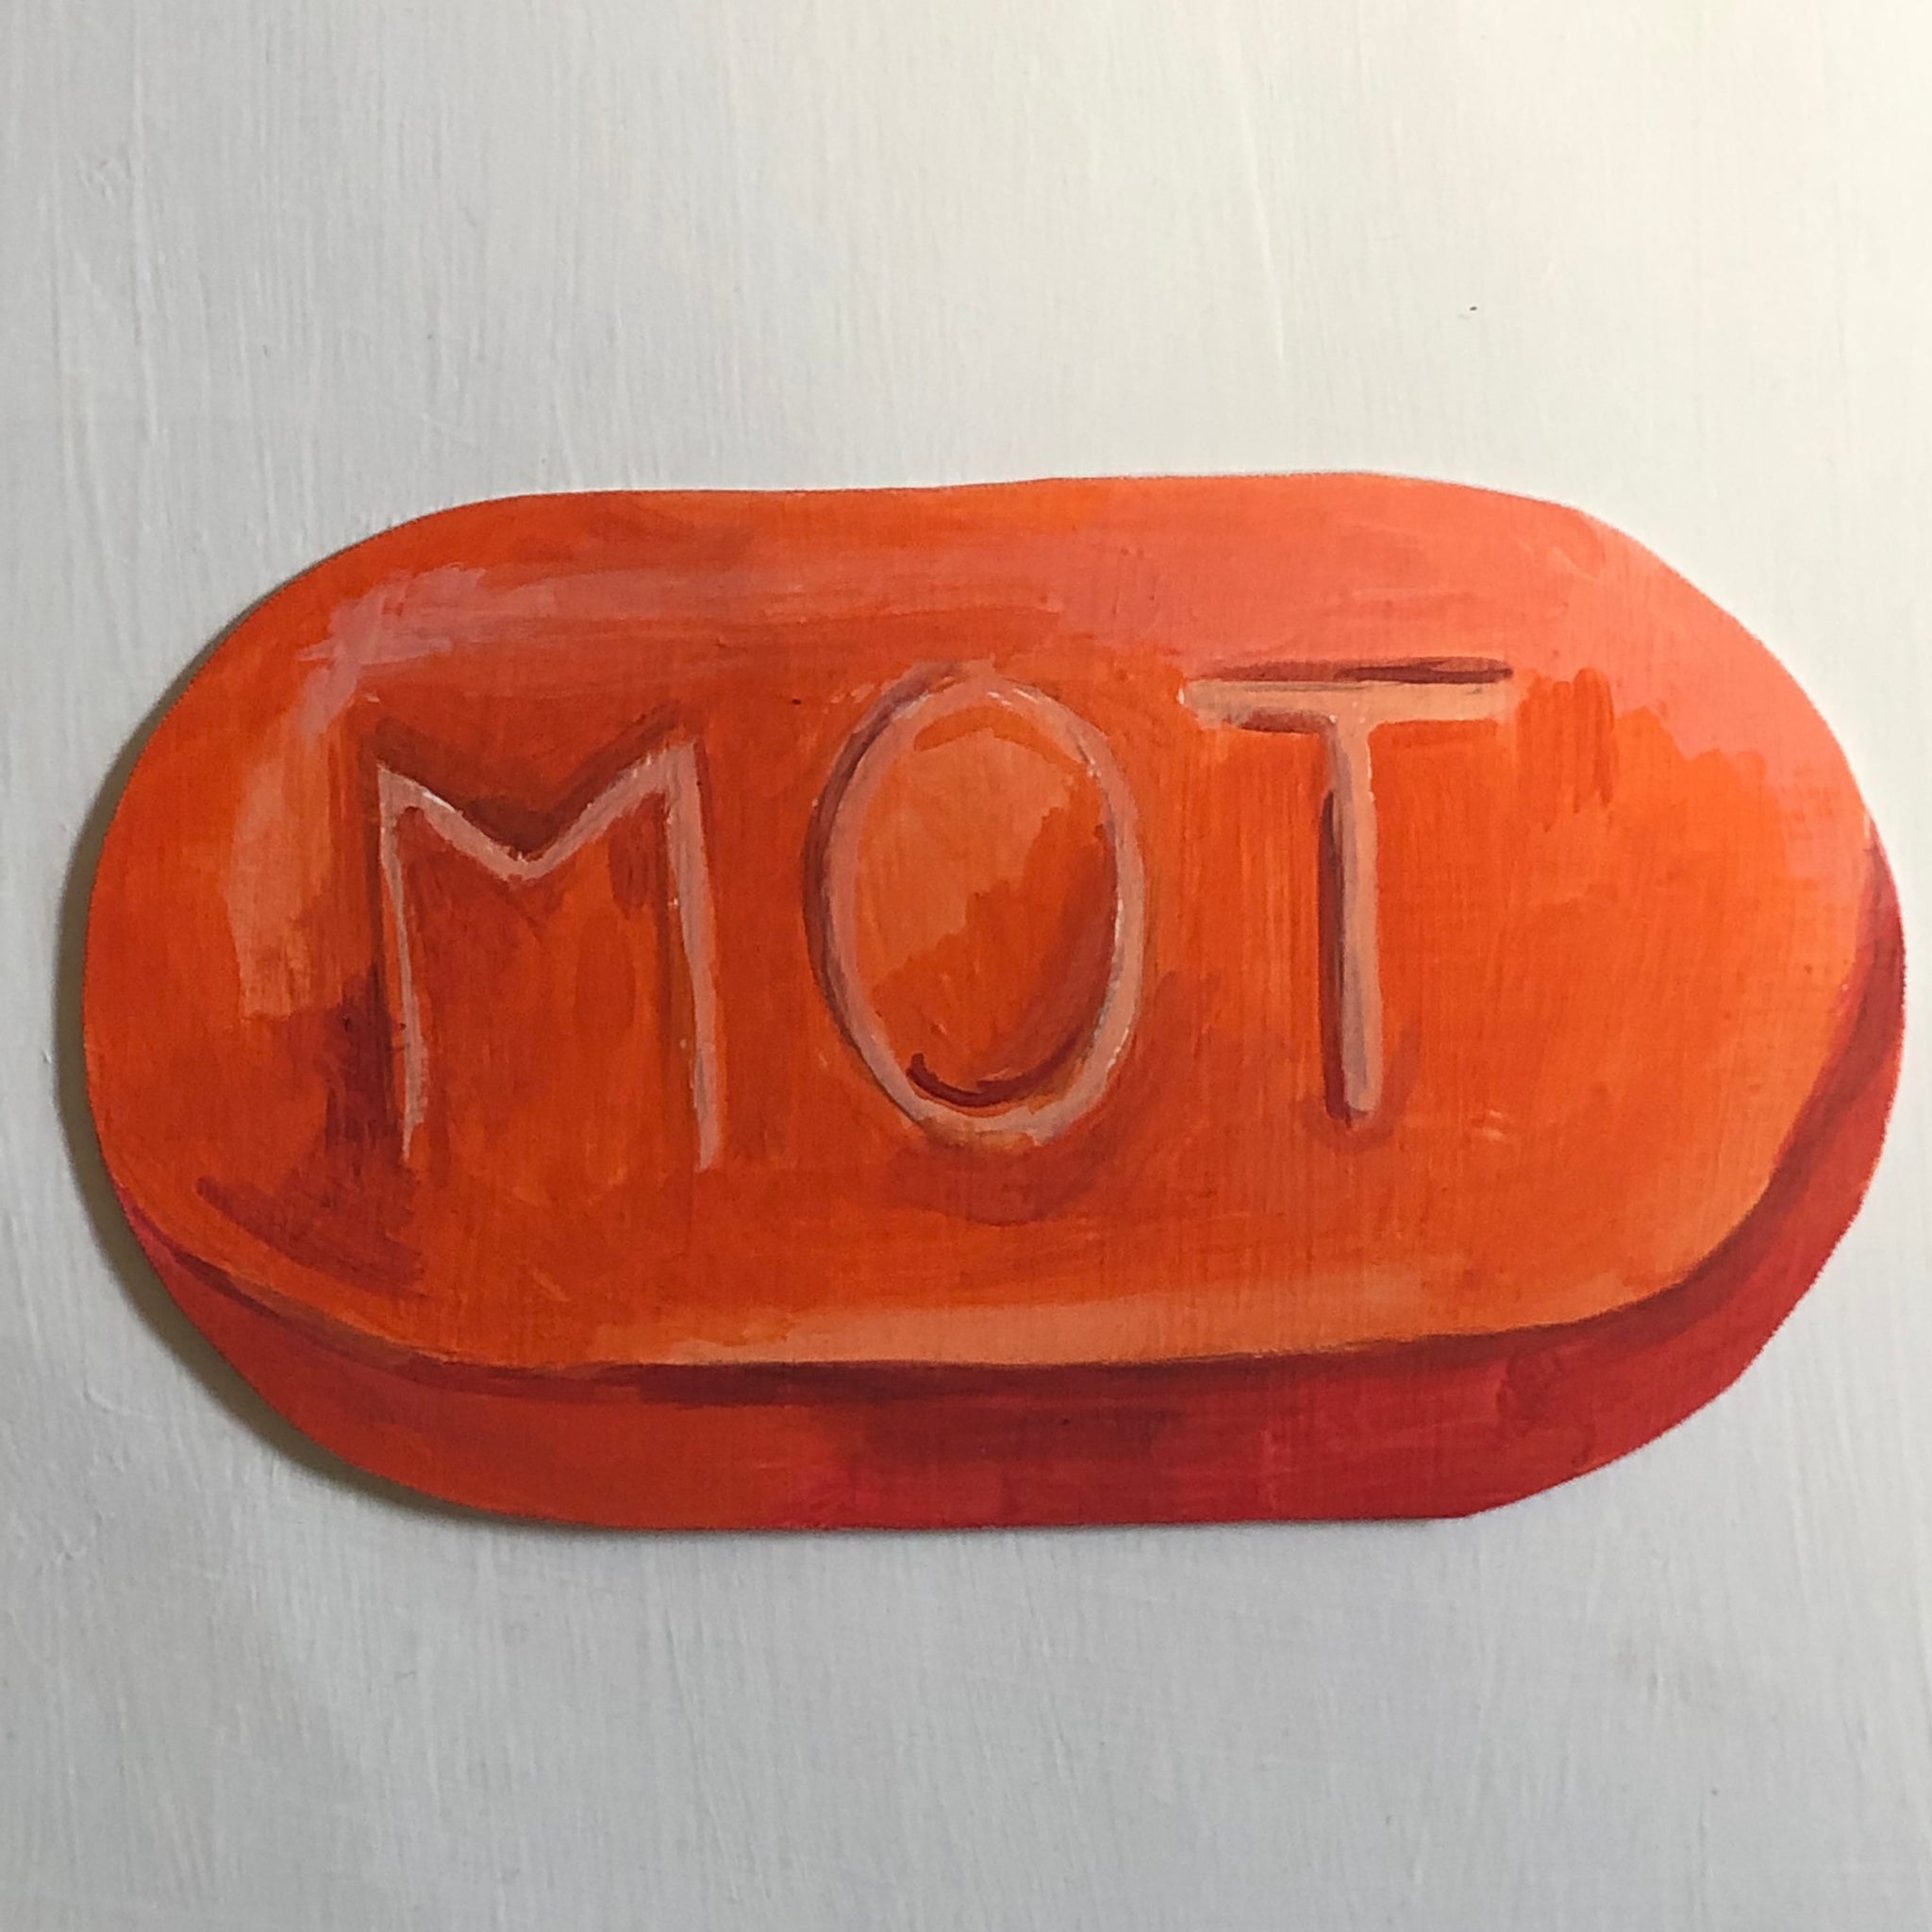 Dale Wittig, "Motrin, the red pill"